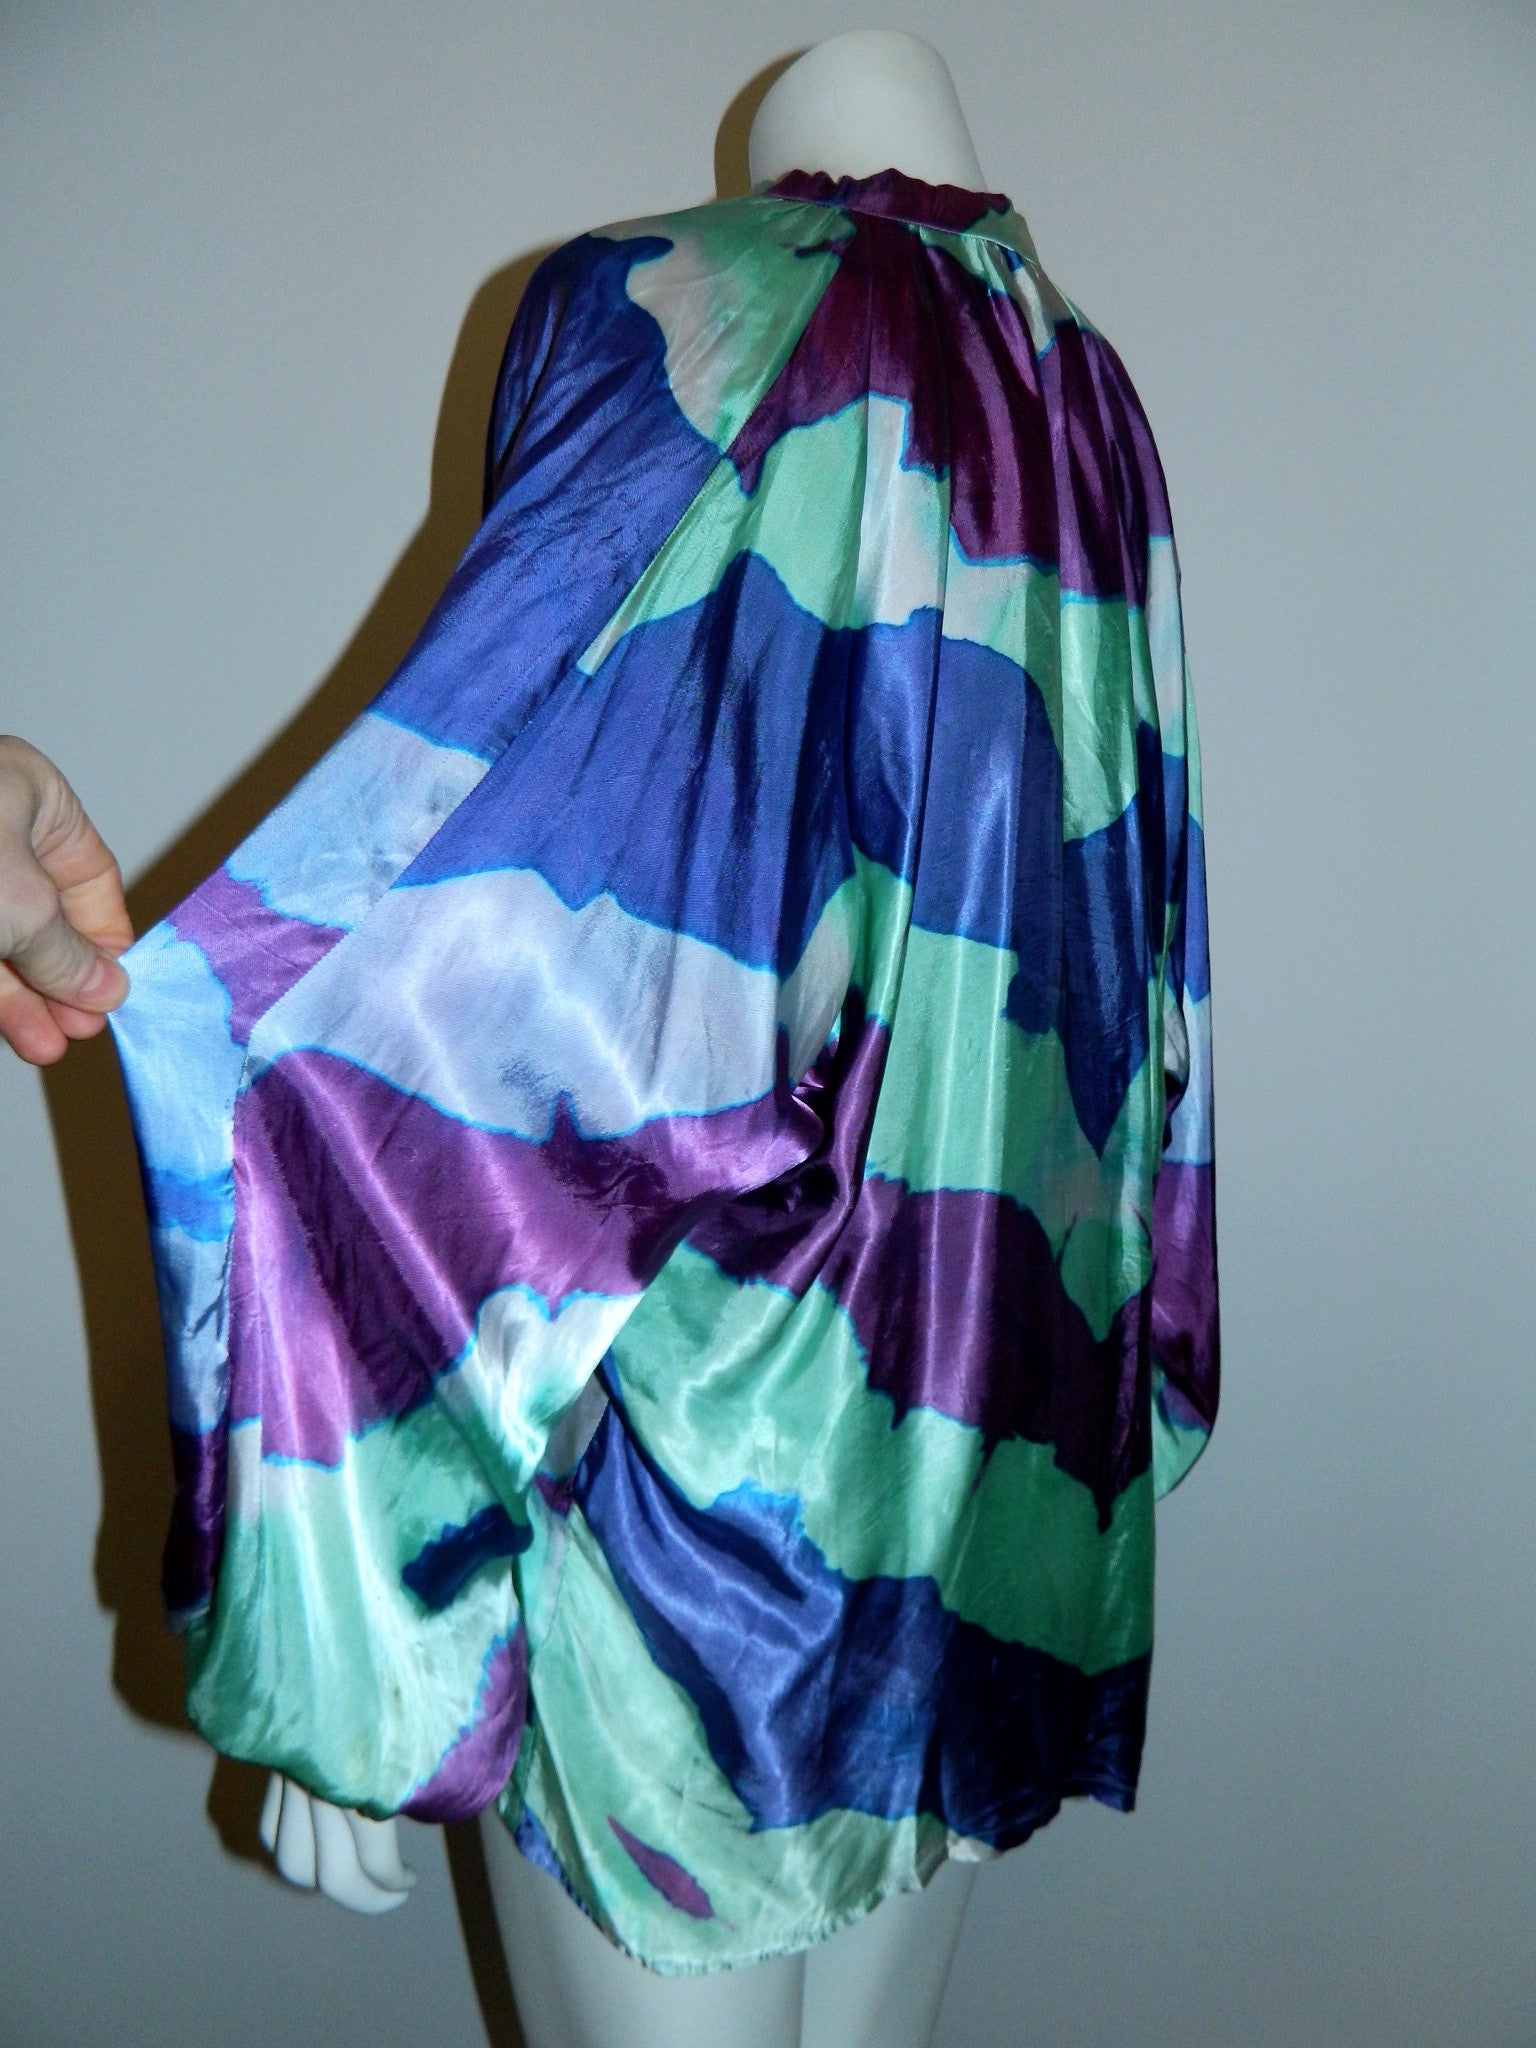 purple waves satin blouse / 1970s hand dyed vintage top / artist made OOAK